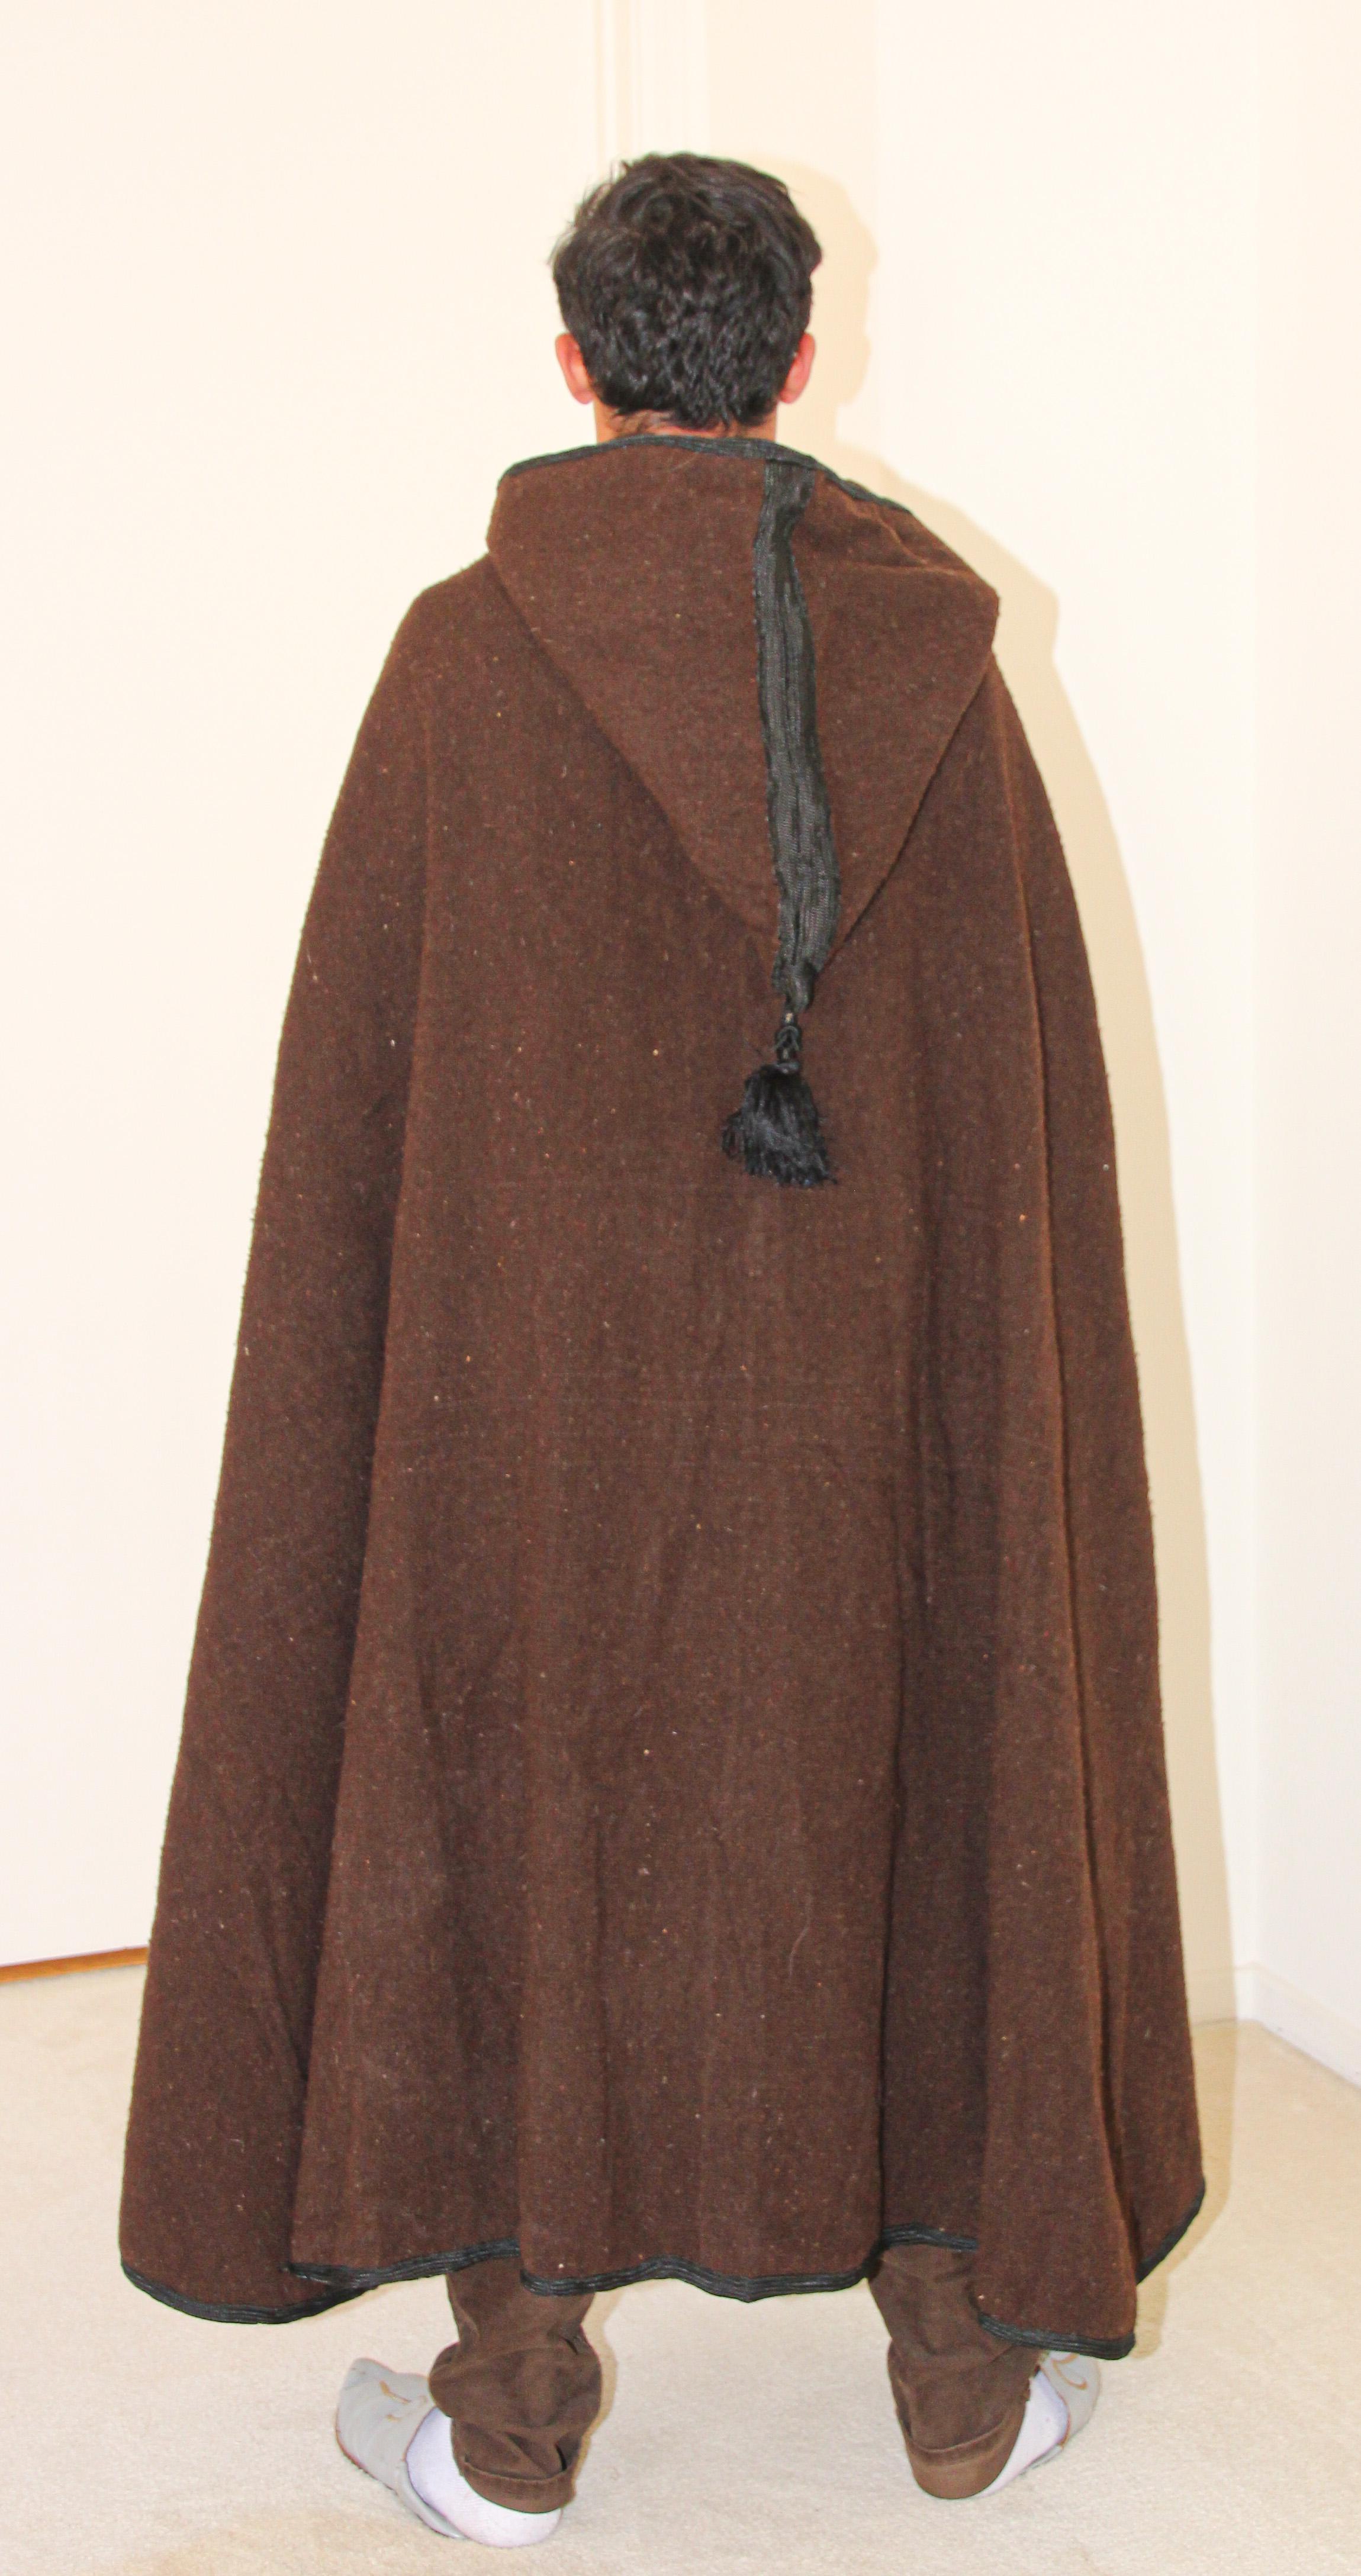 Moroccan Akhnif Berber hooded burnous cape in handwoven brown wool.
Heavy Tribal traditional ethnic cape with hood handwoven in the High Atlas Mountains.
Chocolate brown natural organic wool colors.
The burnus (also called a selham) is long, hooded